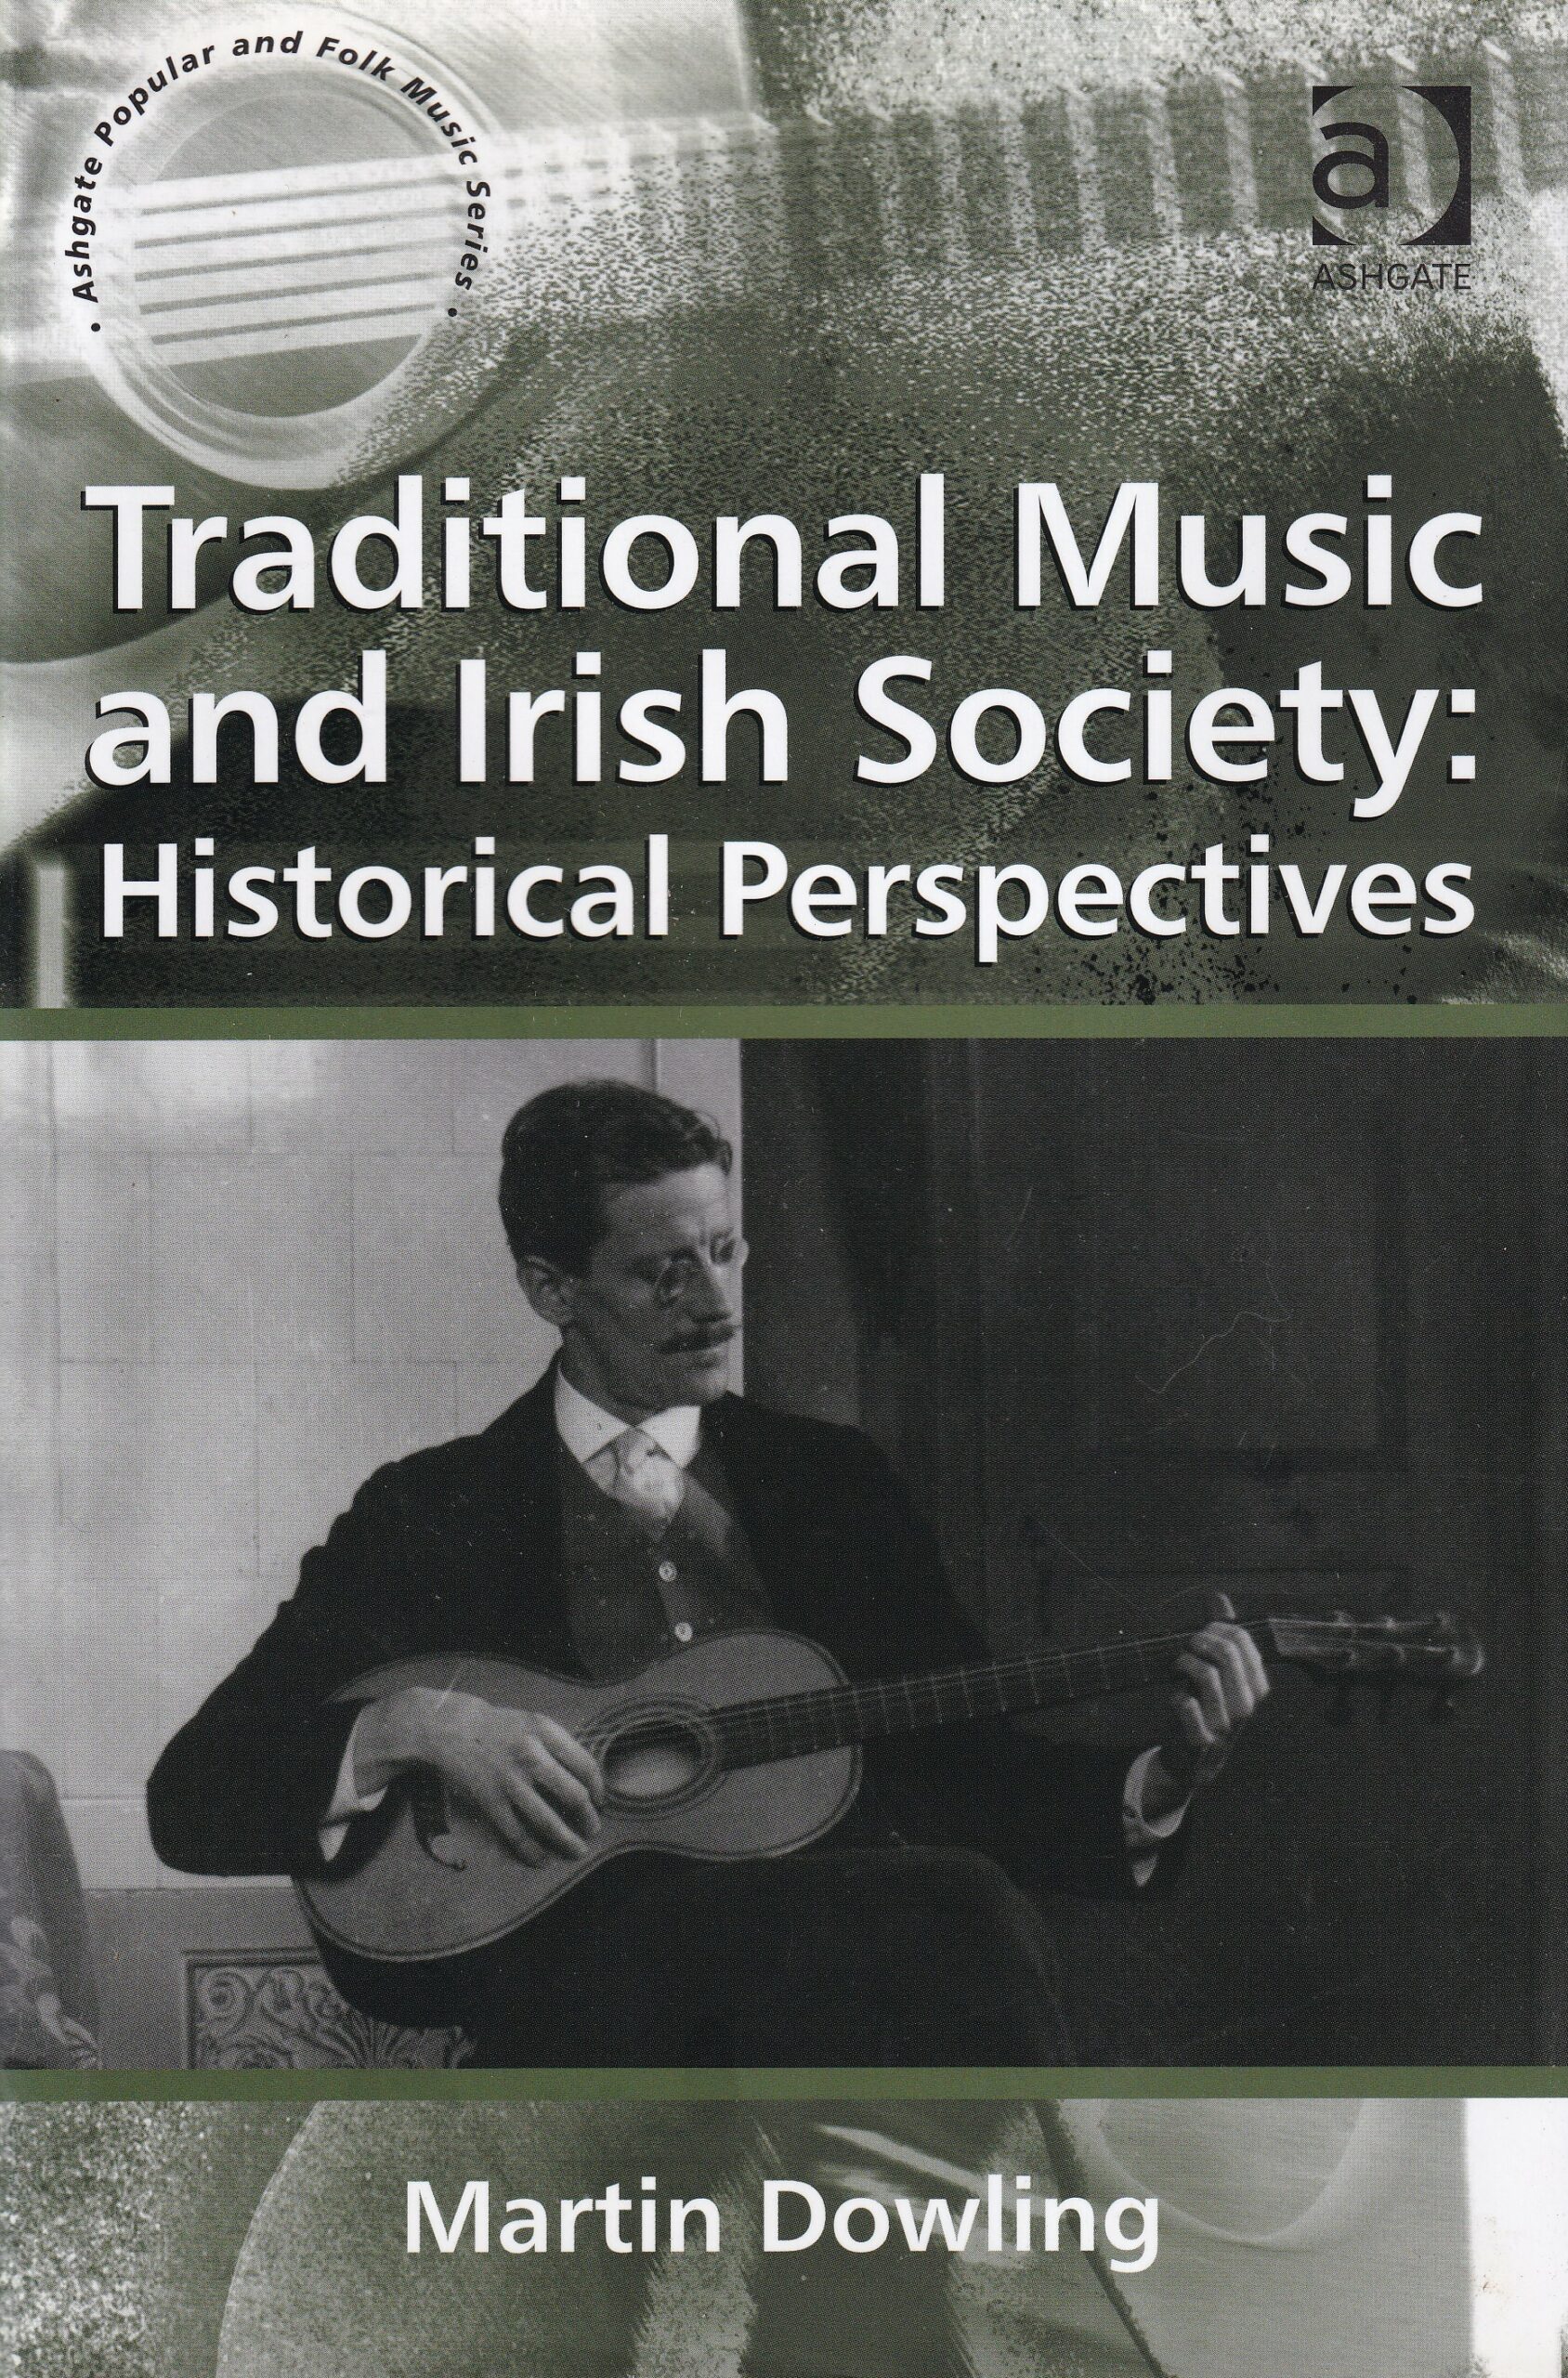 Traditional Music and Irish Society: Historical Perspectives | Martin Dowling | Charlie Byrne's